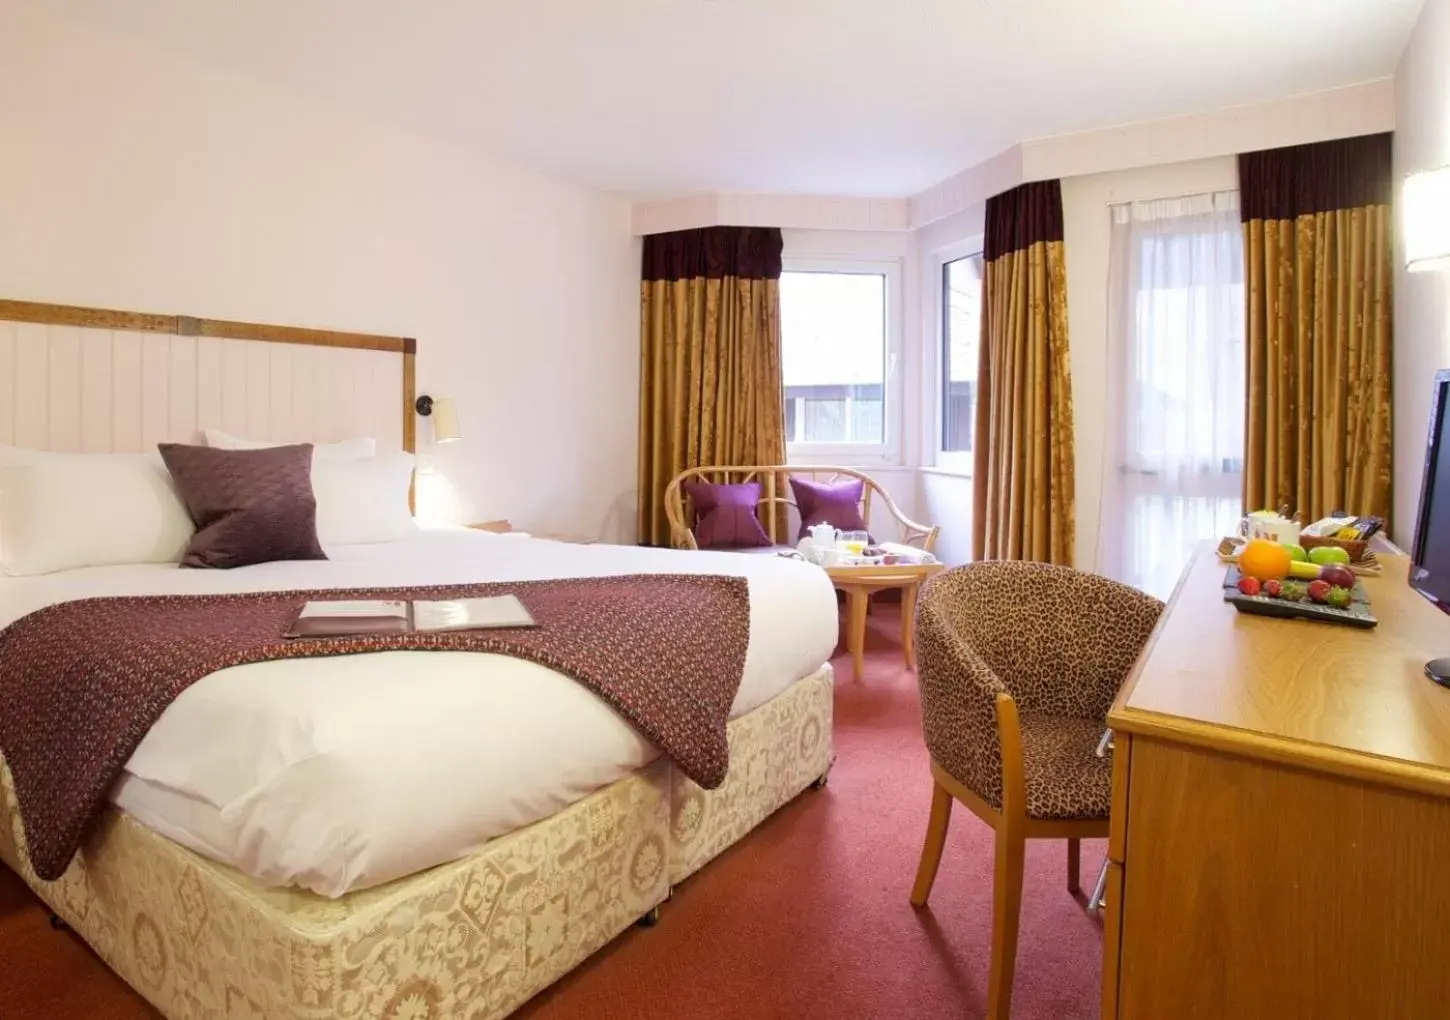 Superior Double Room in Marwell Hotel - A Bespoke Hotel